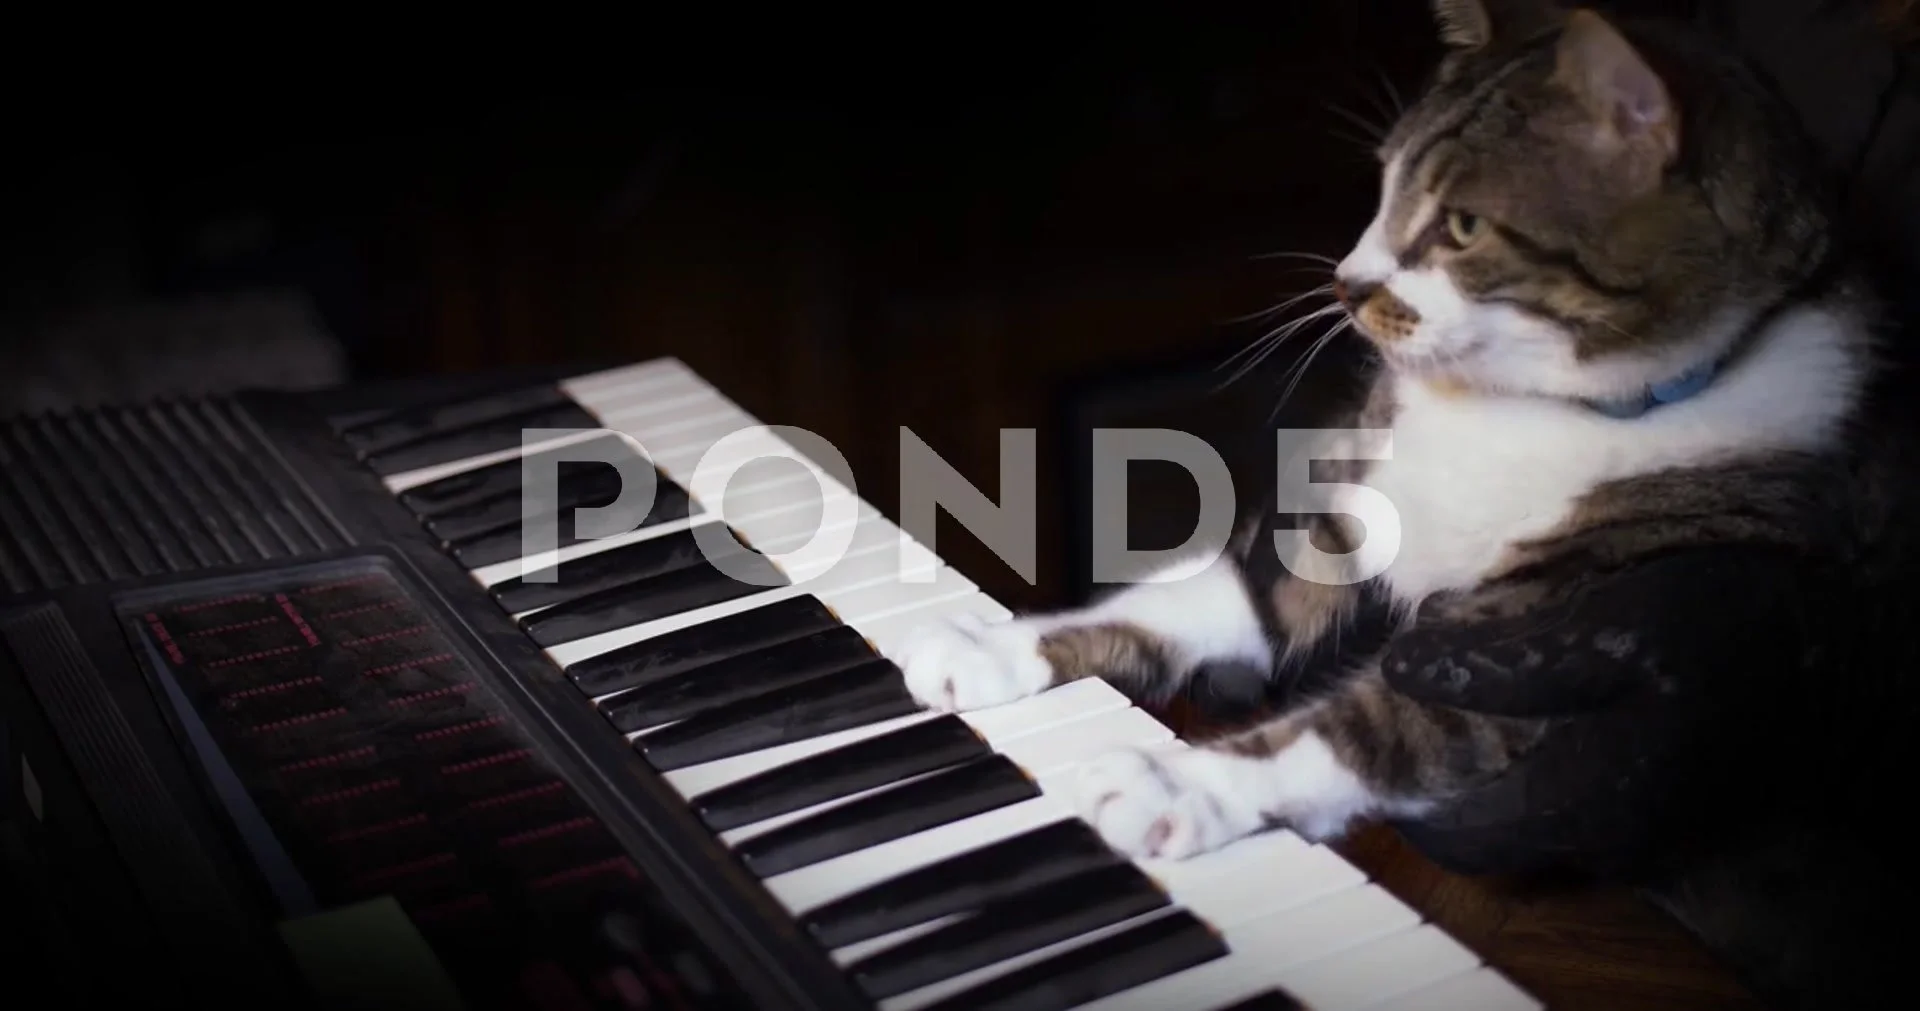 Cat Piano Game - Play Online